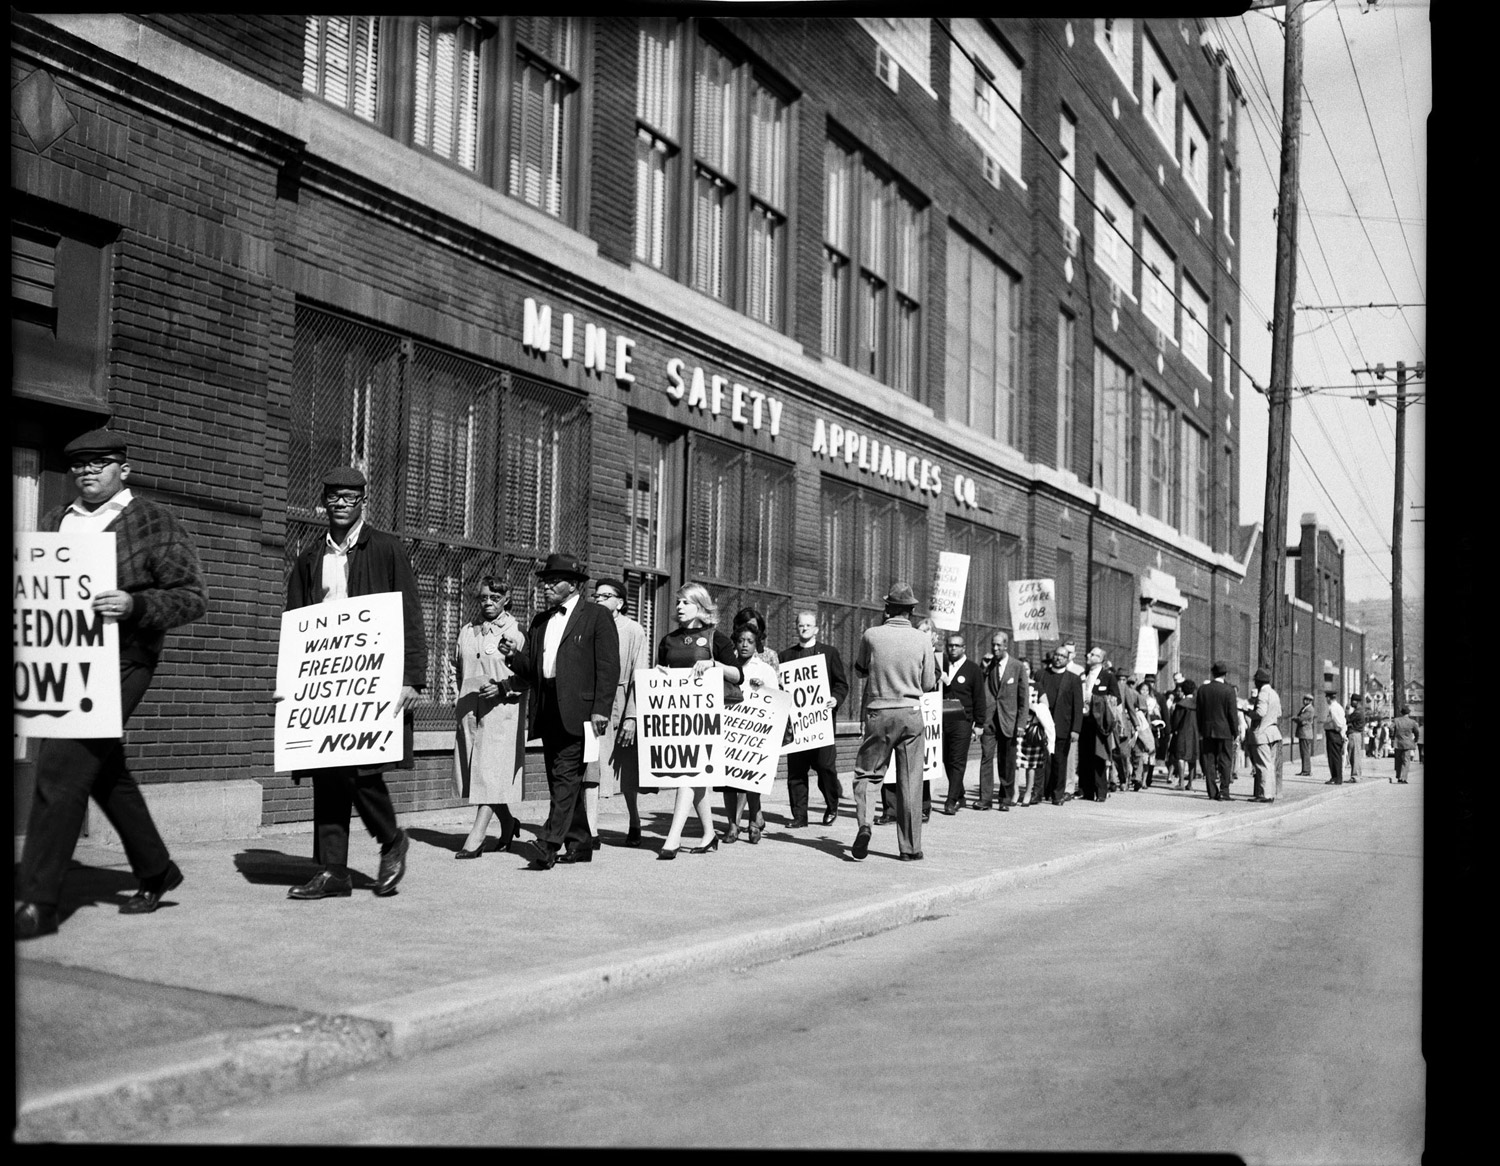 Protestors with UNPC signs outside United Mine Safety Appliance, Braddock Avenue, October 1963.